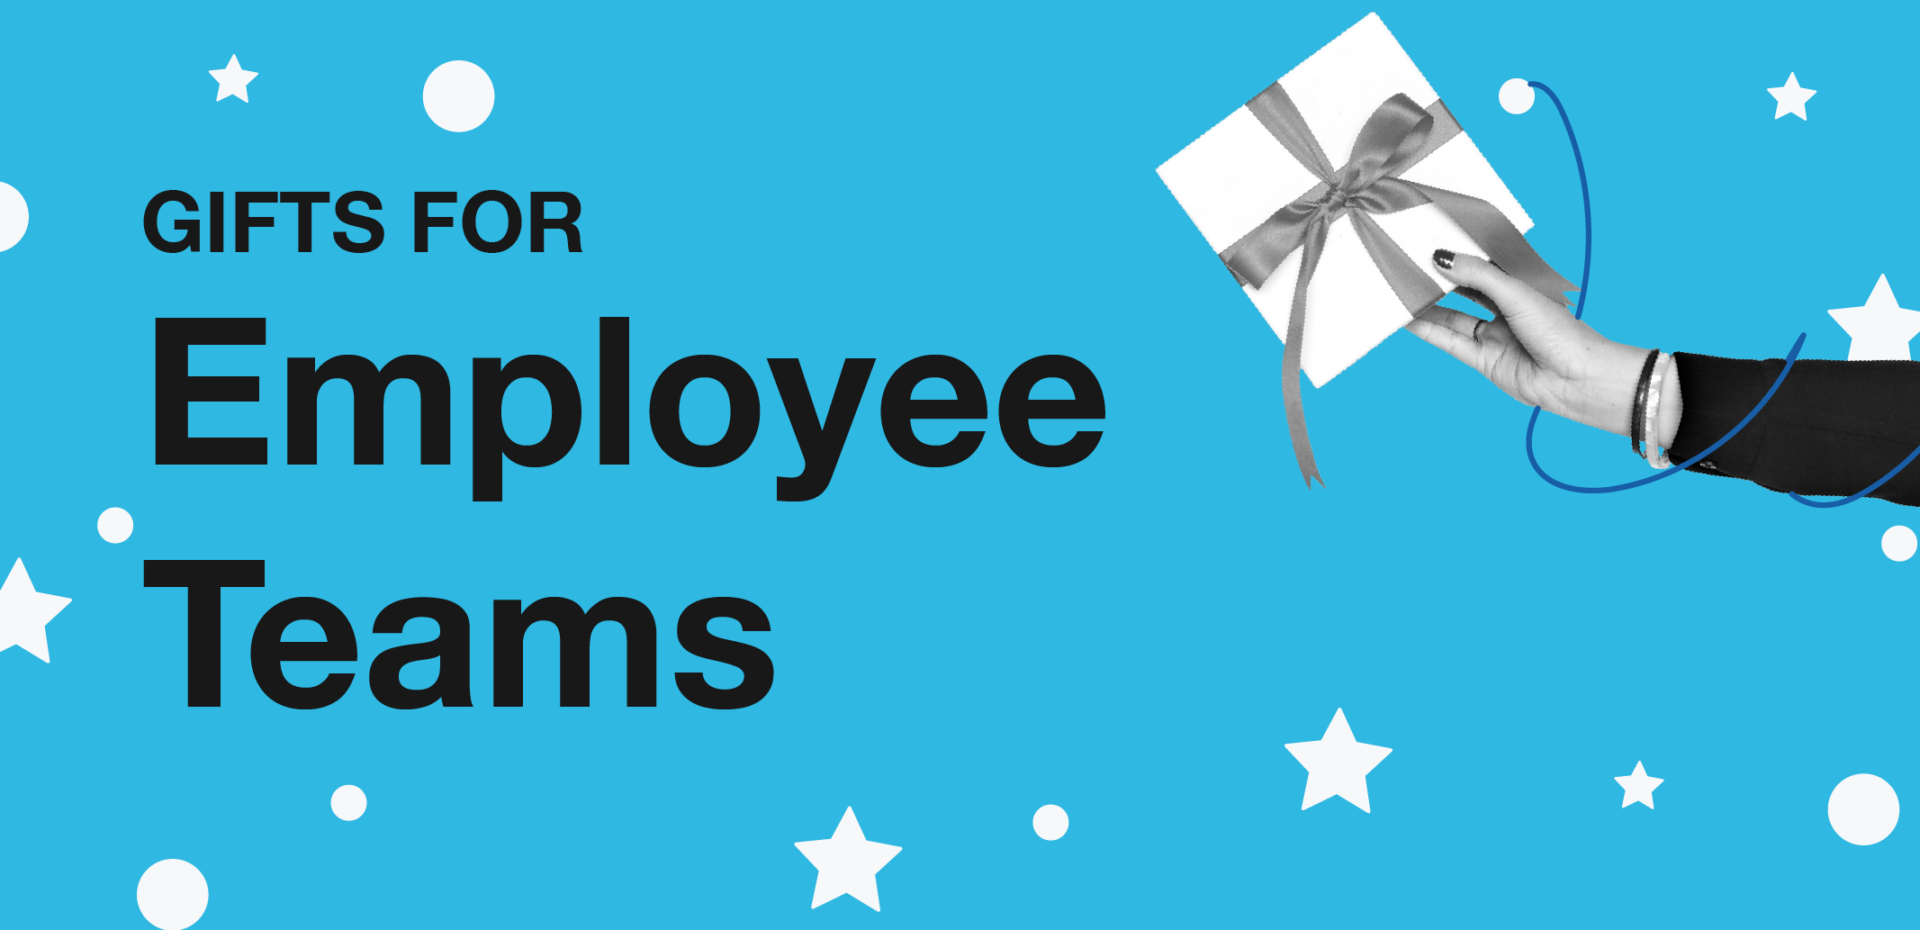 Gifts for employee teams